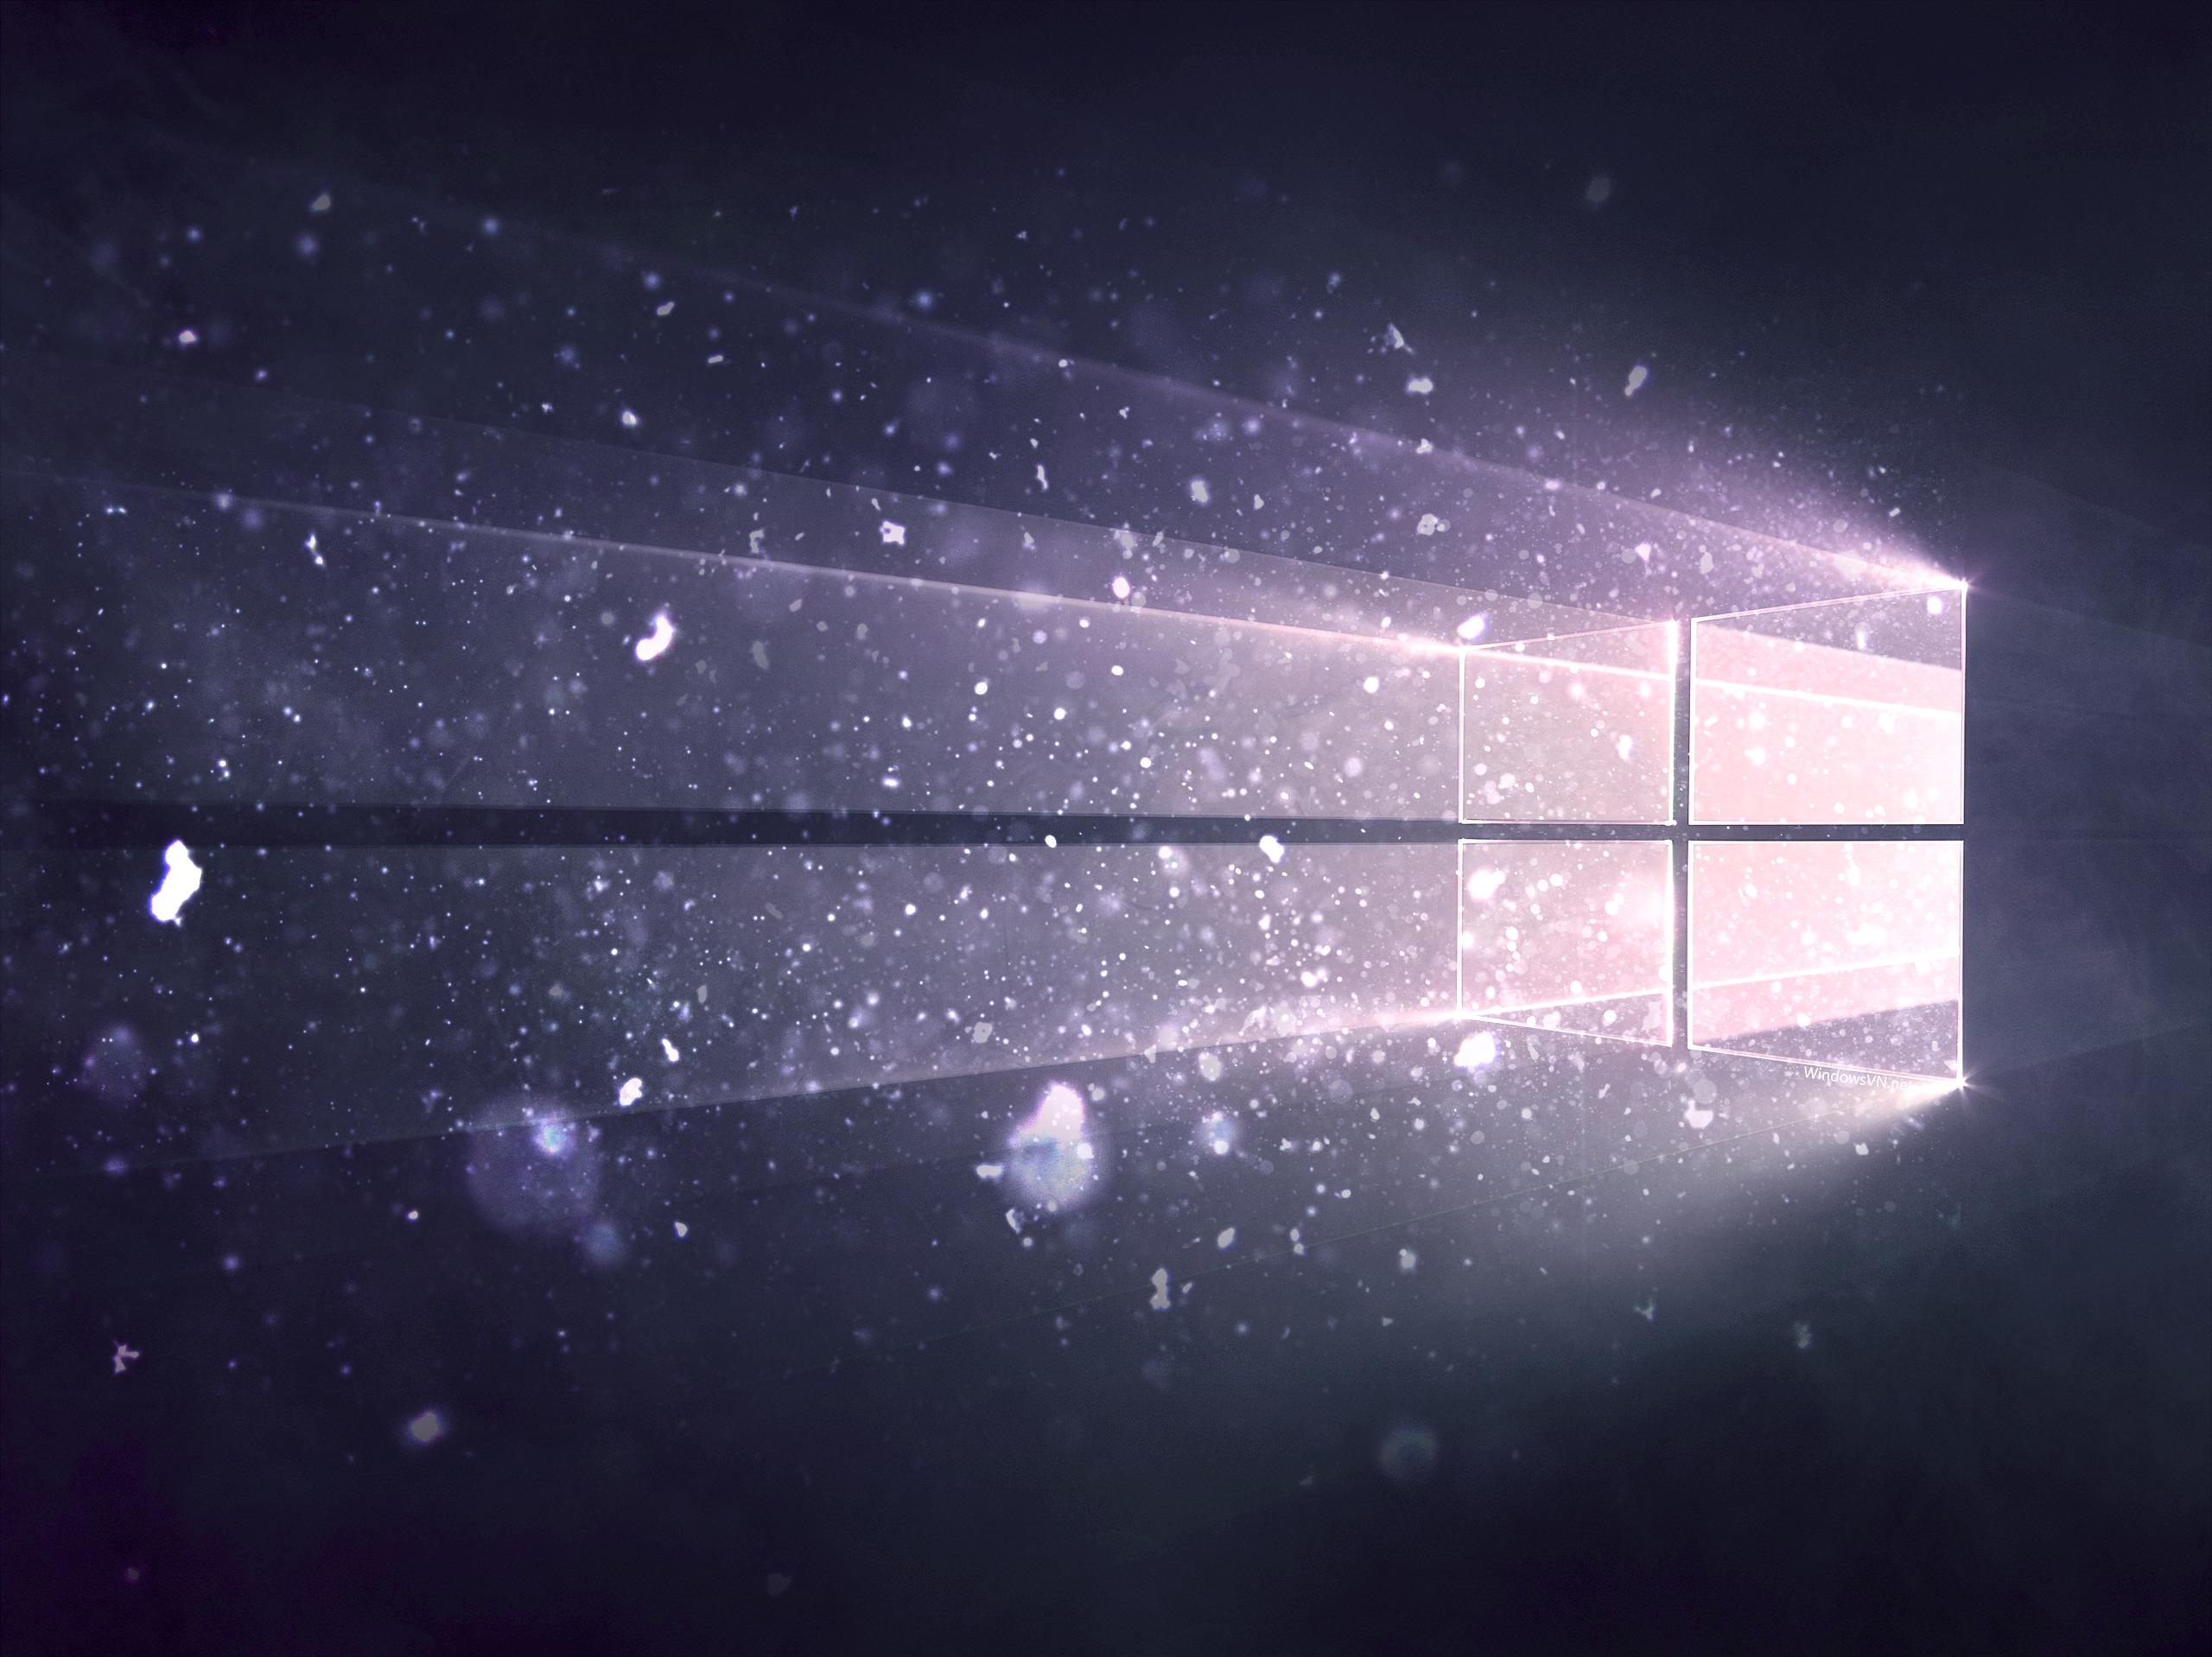 I've Just Make A Windows Hero Winter Themed Wallpaper. What Do You Think Guys